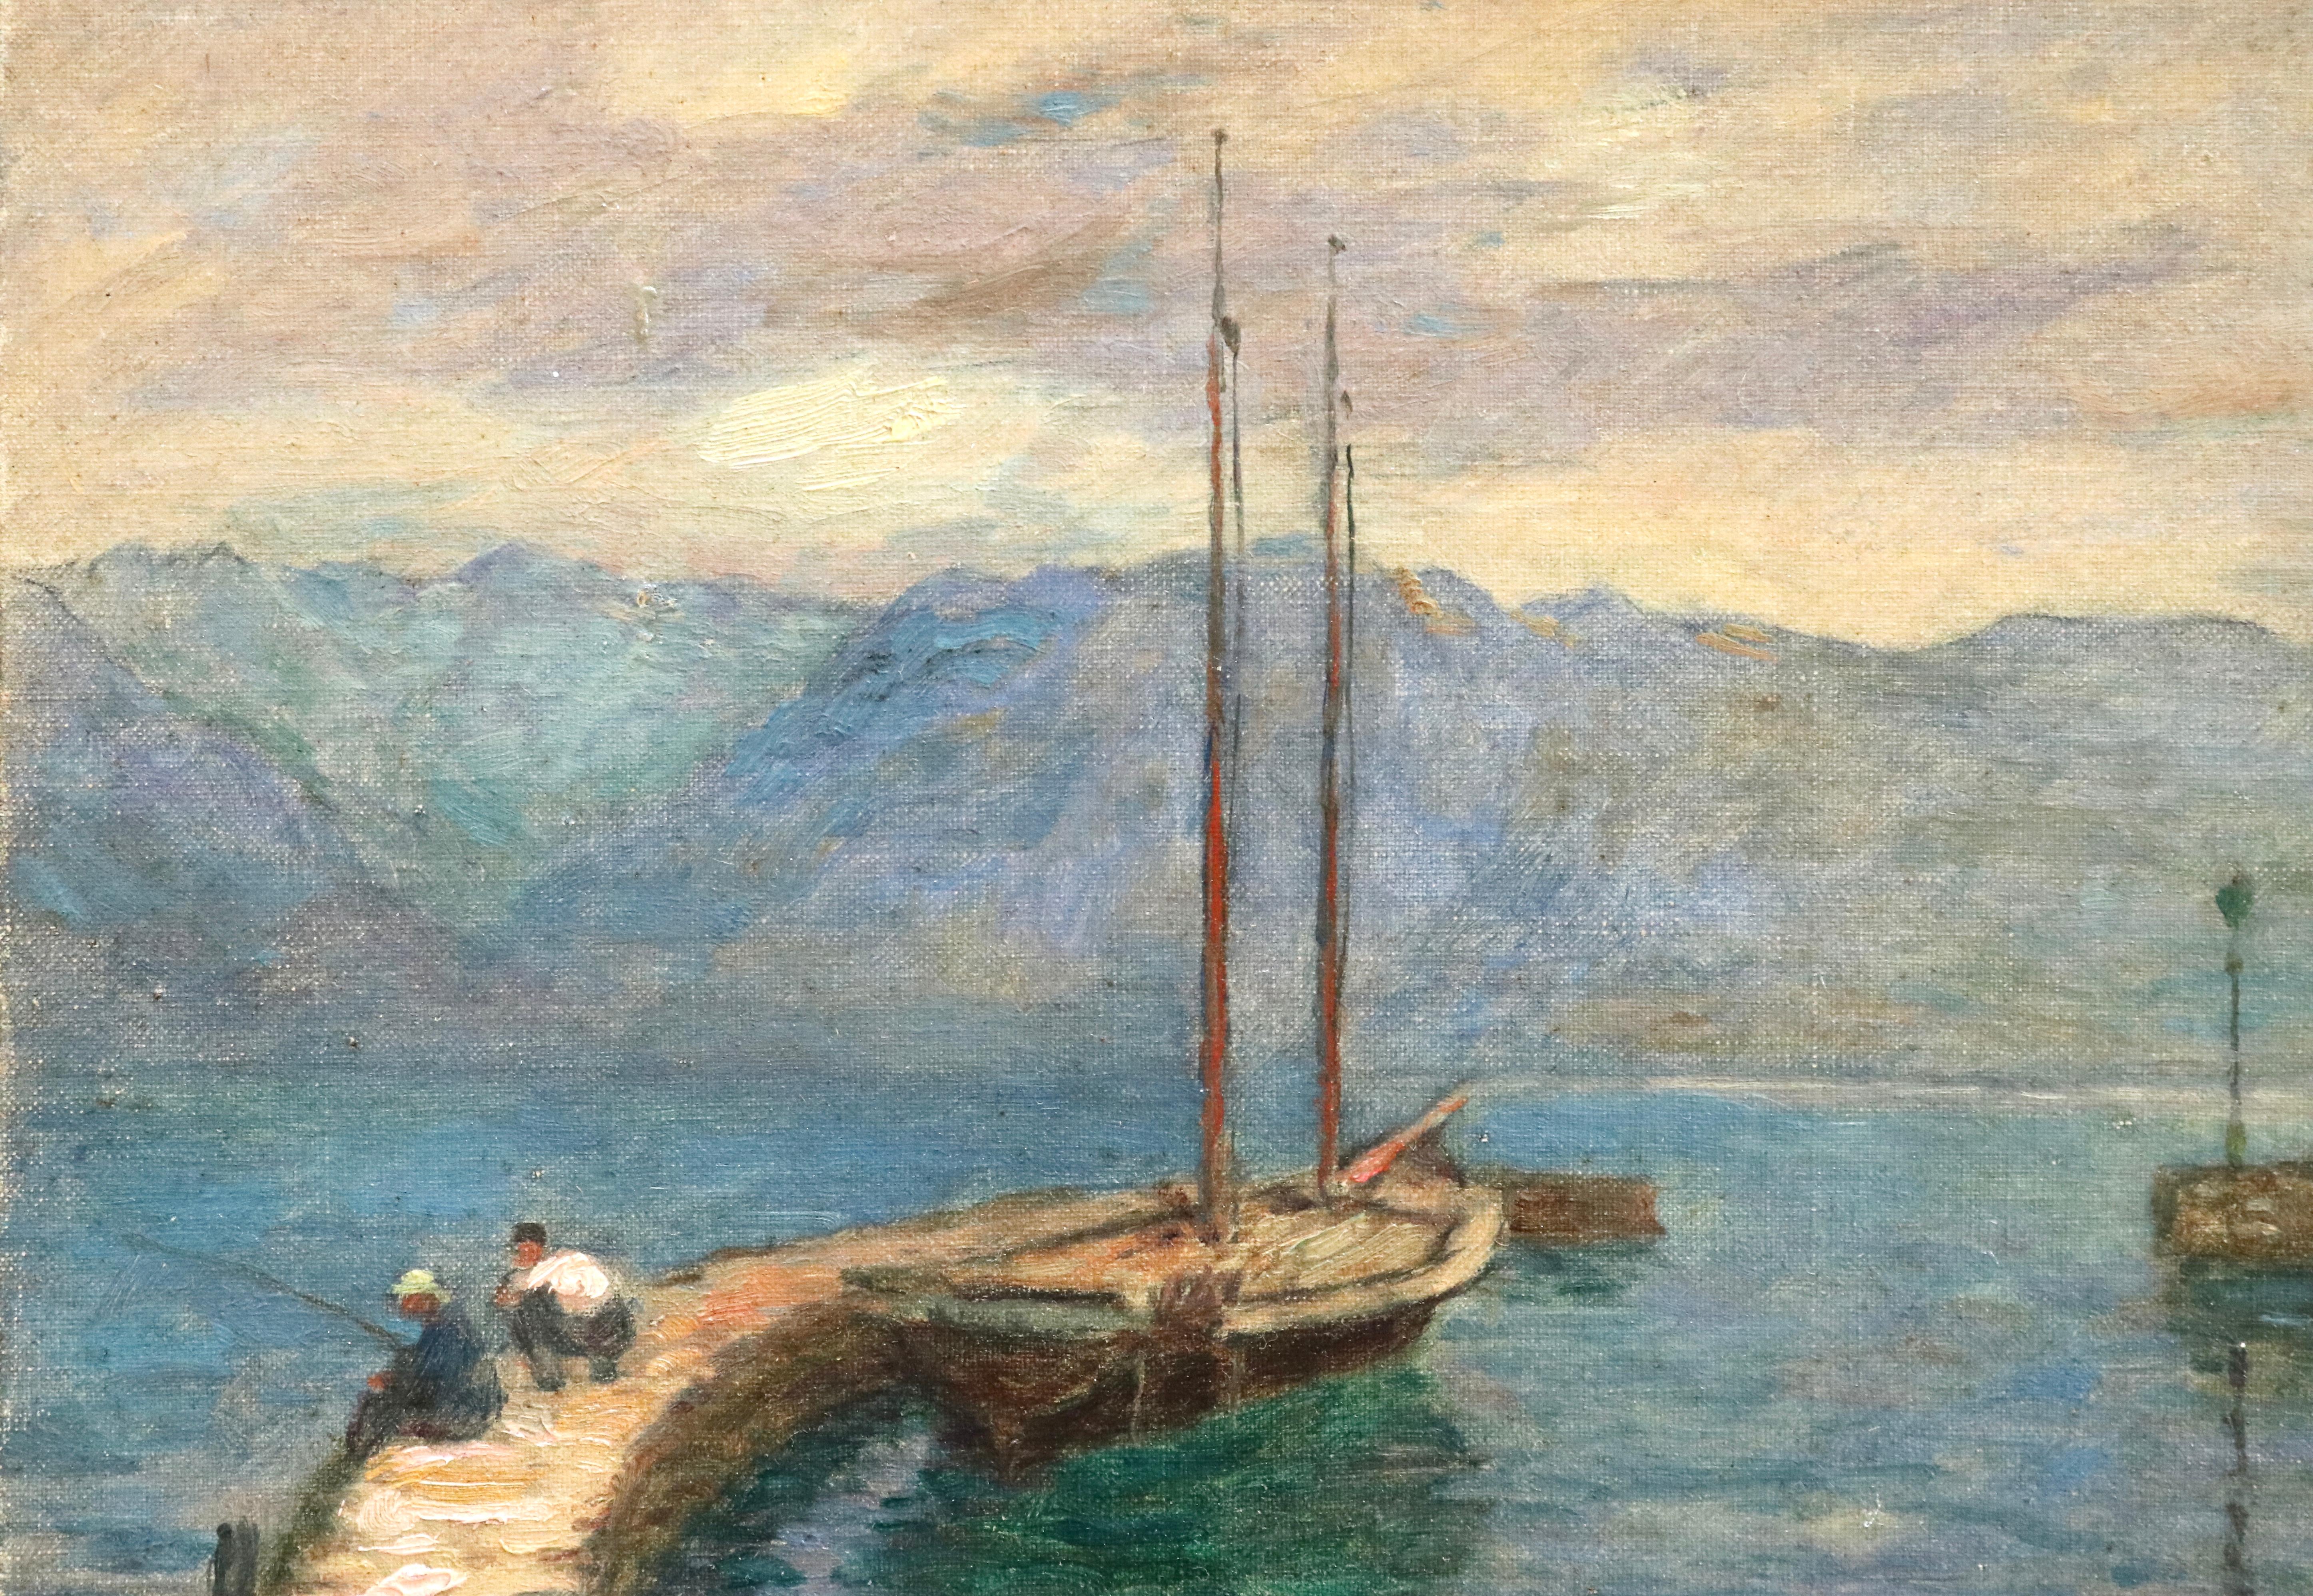 Oil on board circa 1911 by Marie Duhem of Lac Geneva, Montreux with two men fishing beside a boat and mountains in the distance. Signed lower right. This painting is not currently framed but a suitable frame can be sourced if required.

Marie Duhem,